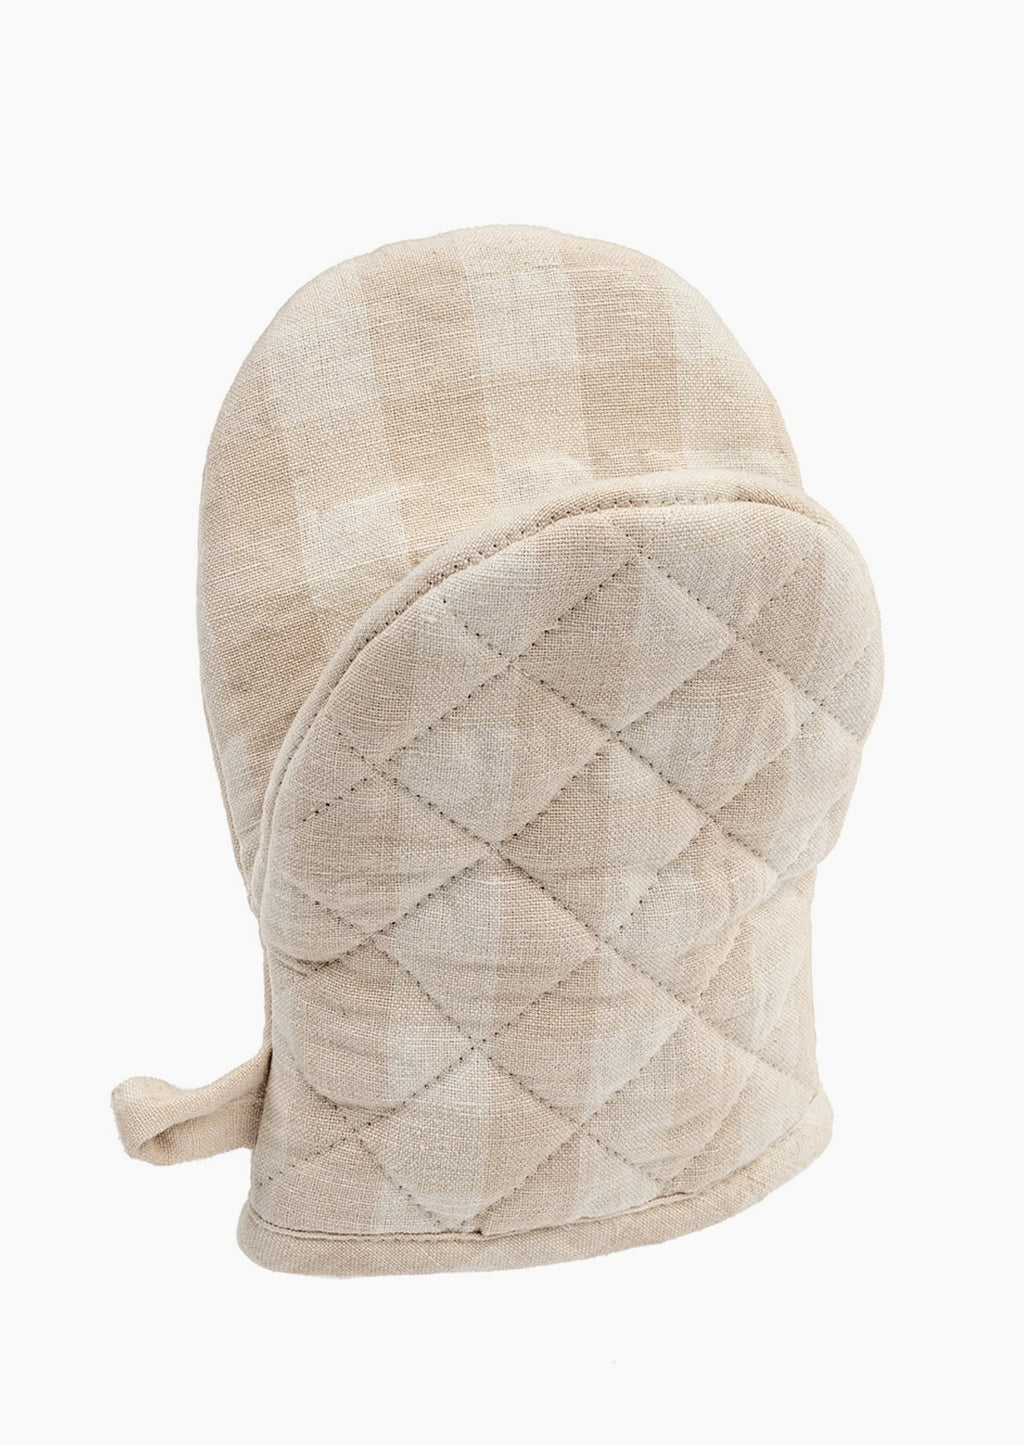 Pale Oat: A gingham oven mitt in pale oat colorway.